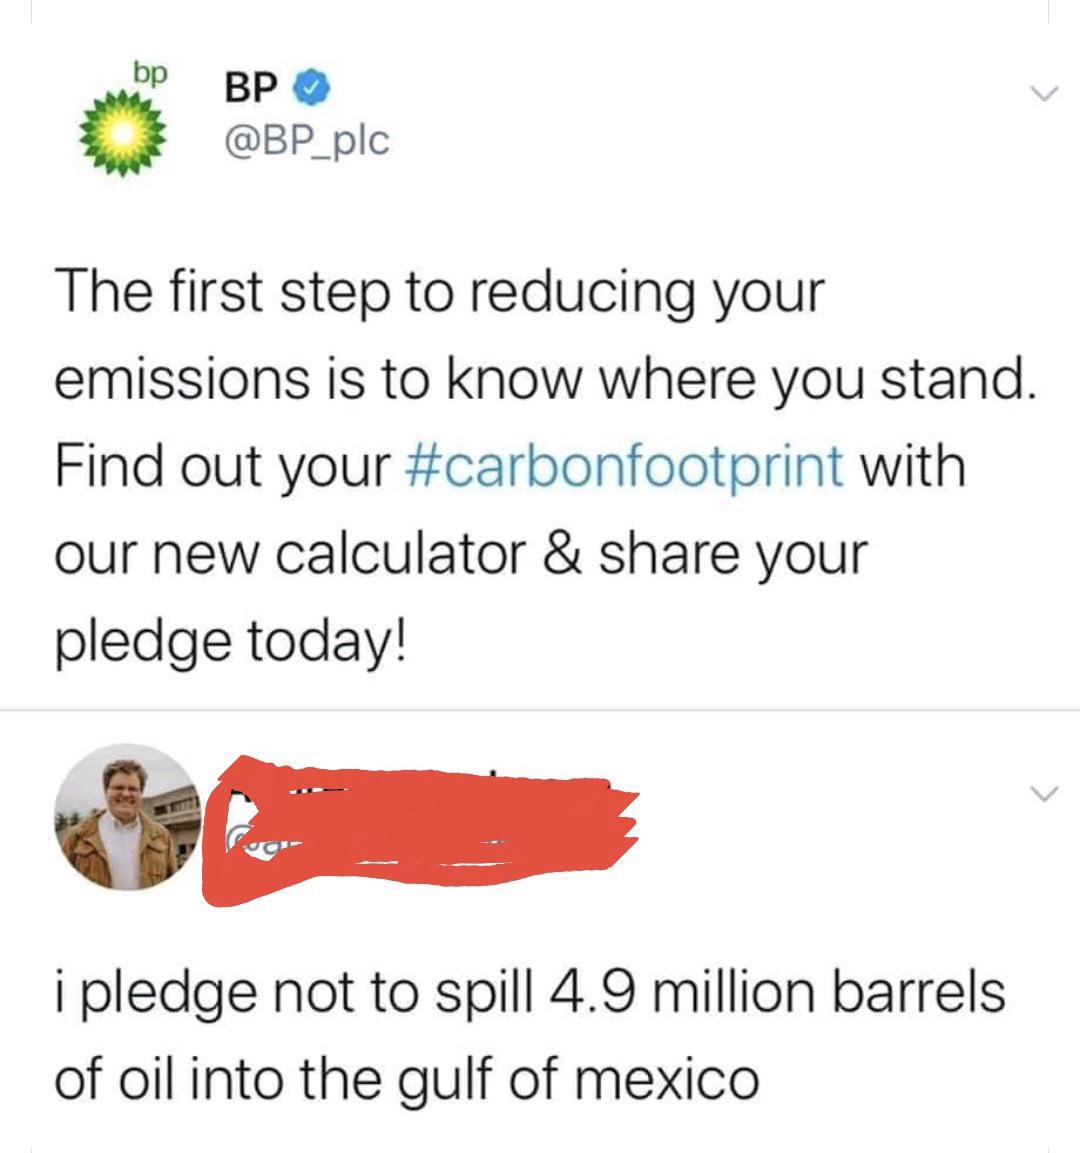 point - Bp The first step to reducing your emissions is to know where you stand. Find out your with our new calculator & your pledge today! i pledge not to spill 4.9 million barrels of oil into the gulf of mexico